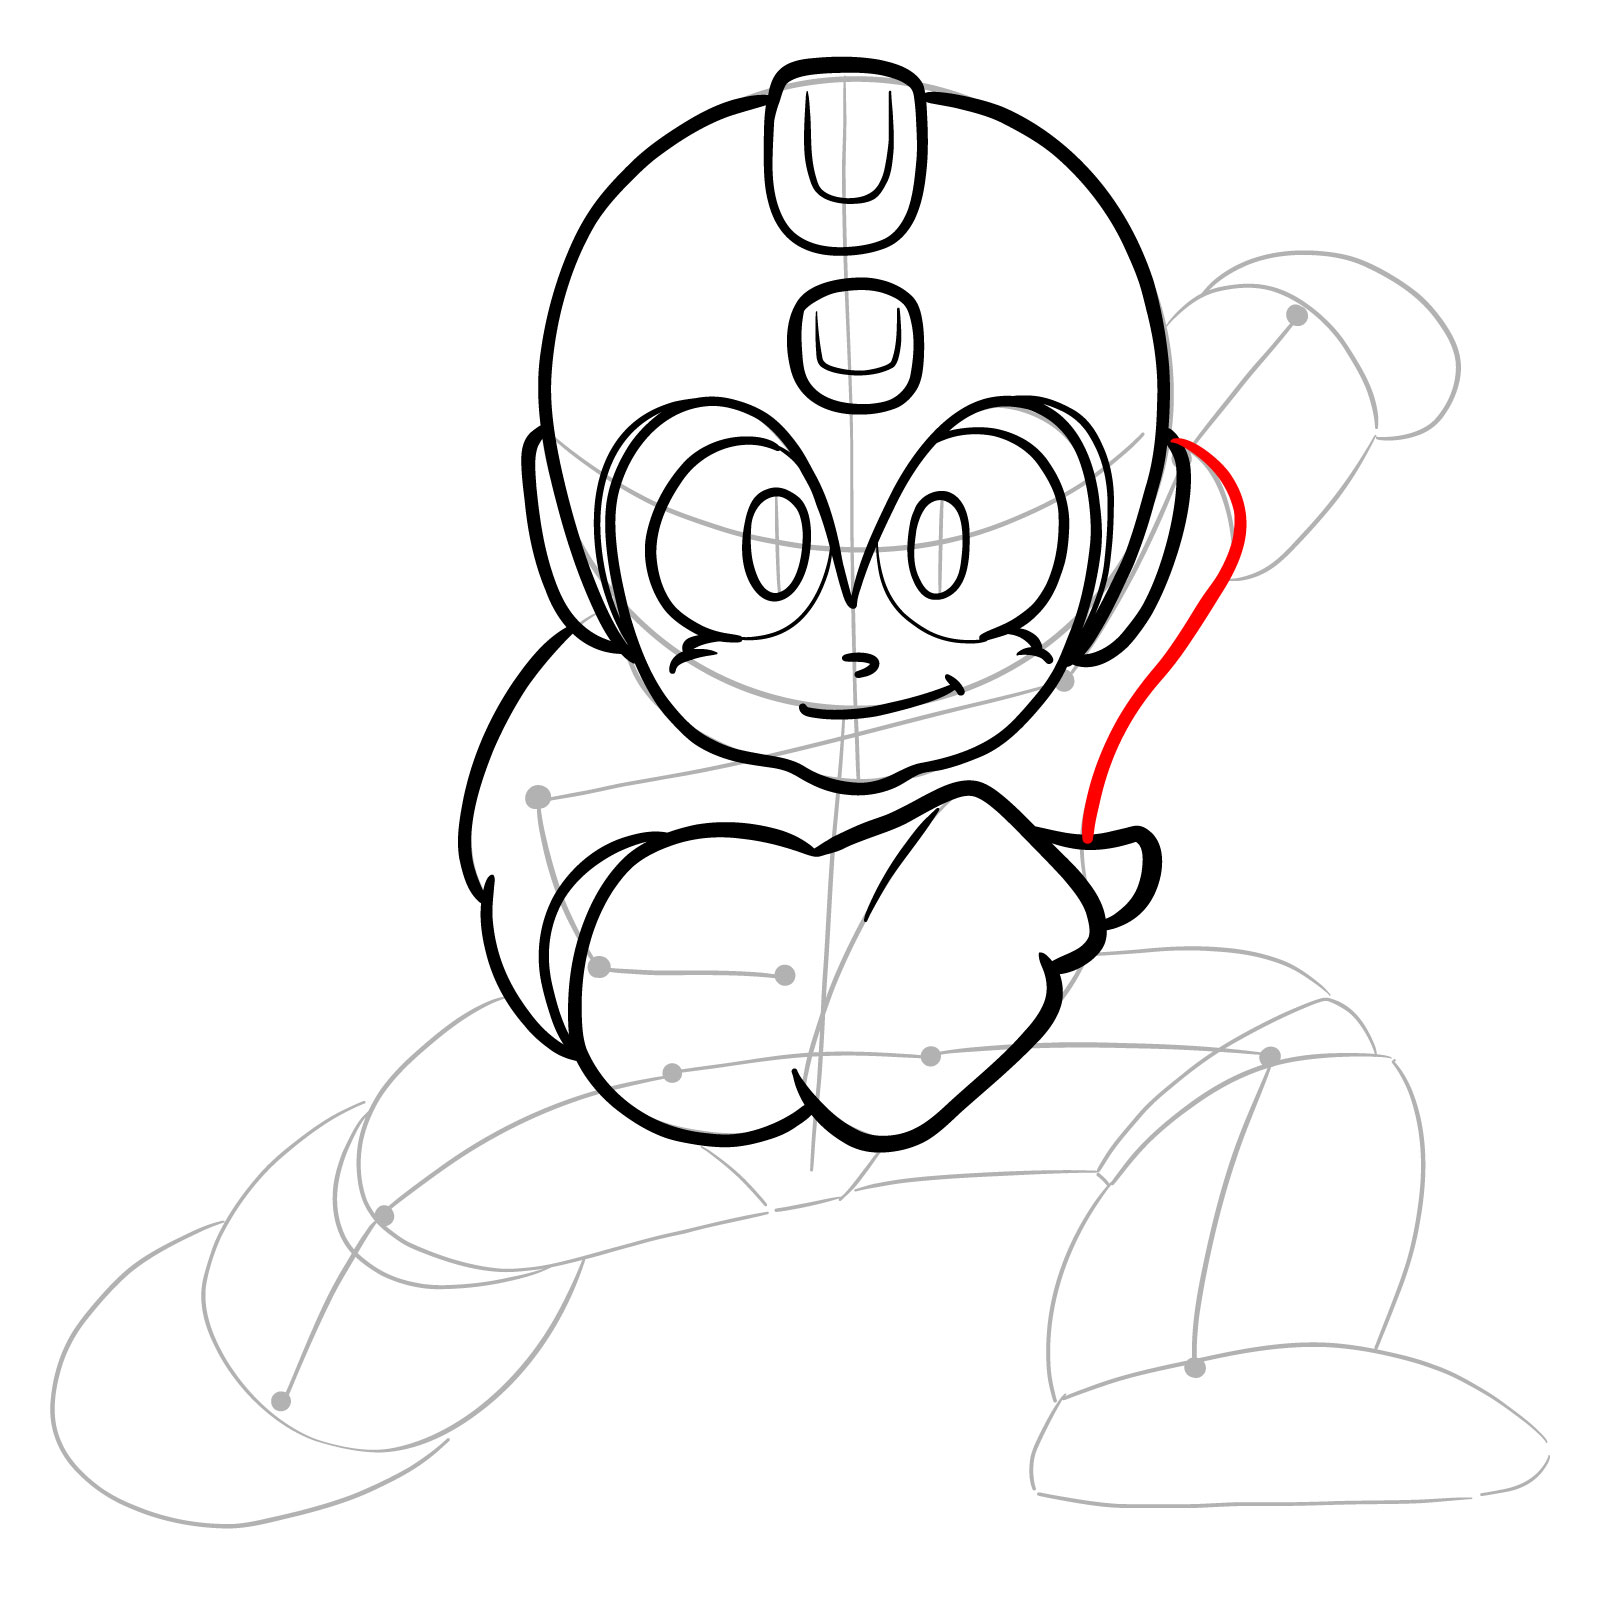 How to draw Mega Man from the original game - step 15